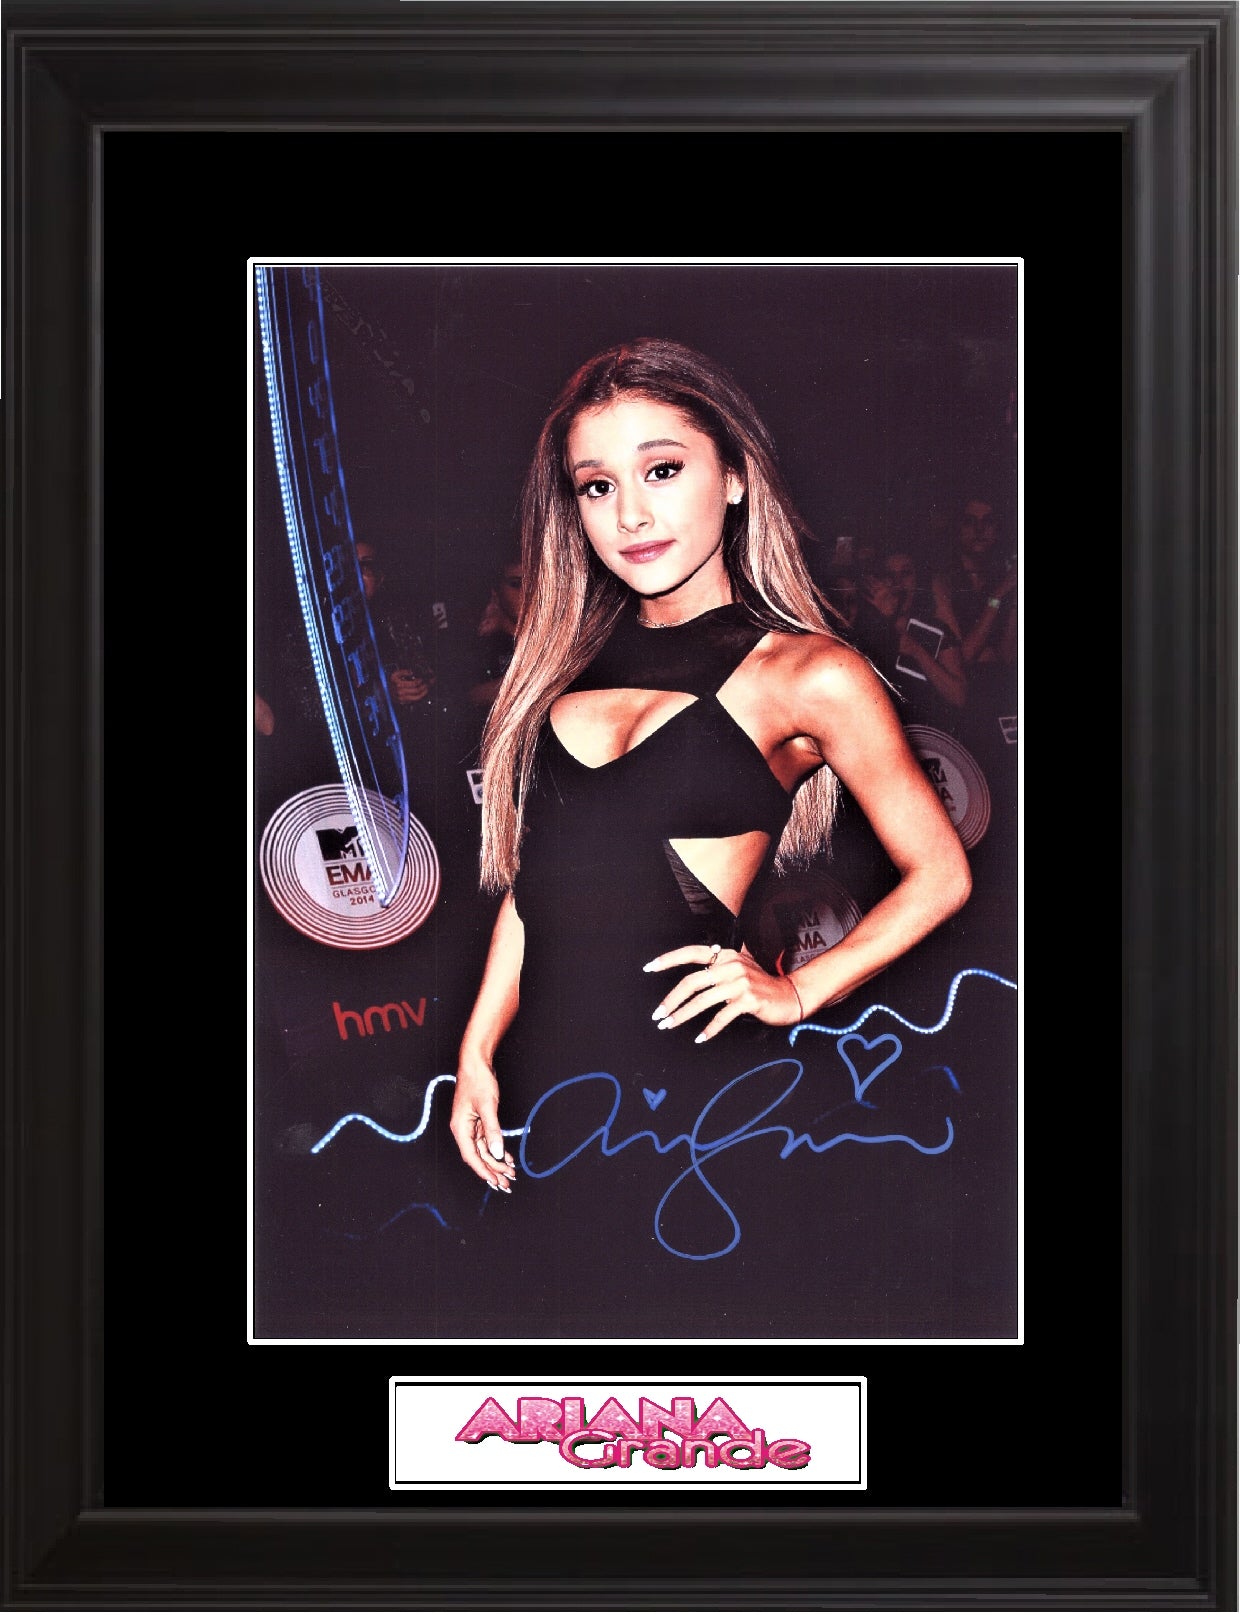 Ariana Grande Autographed Photo - Zion Graphic Collectibles